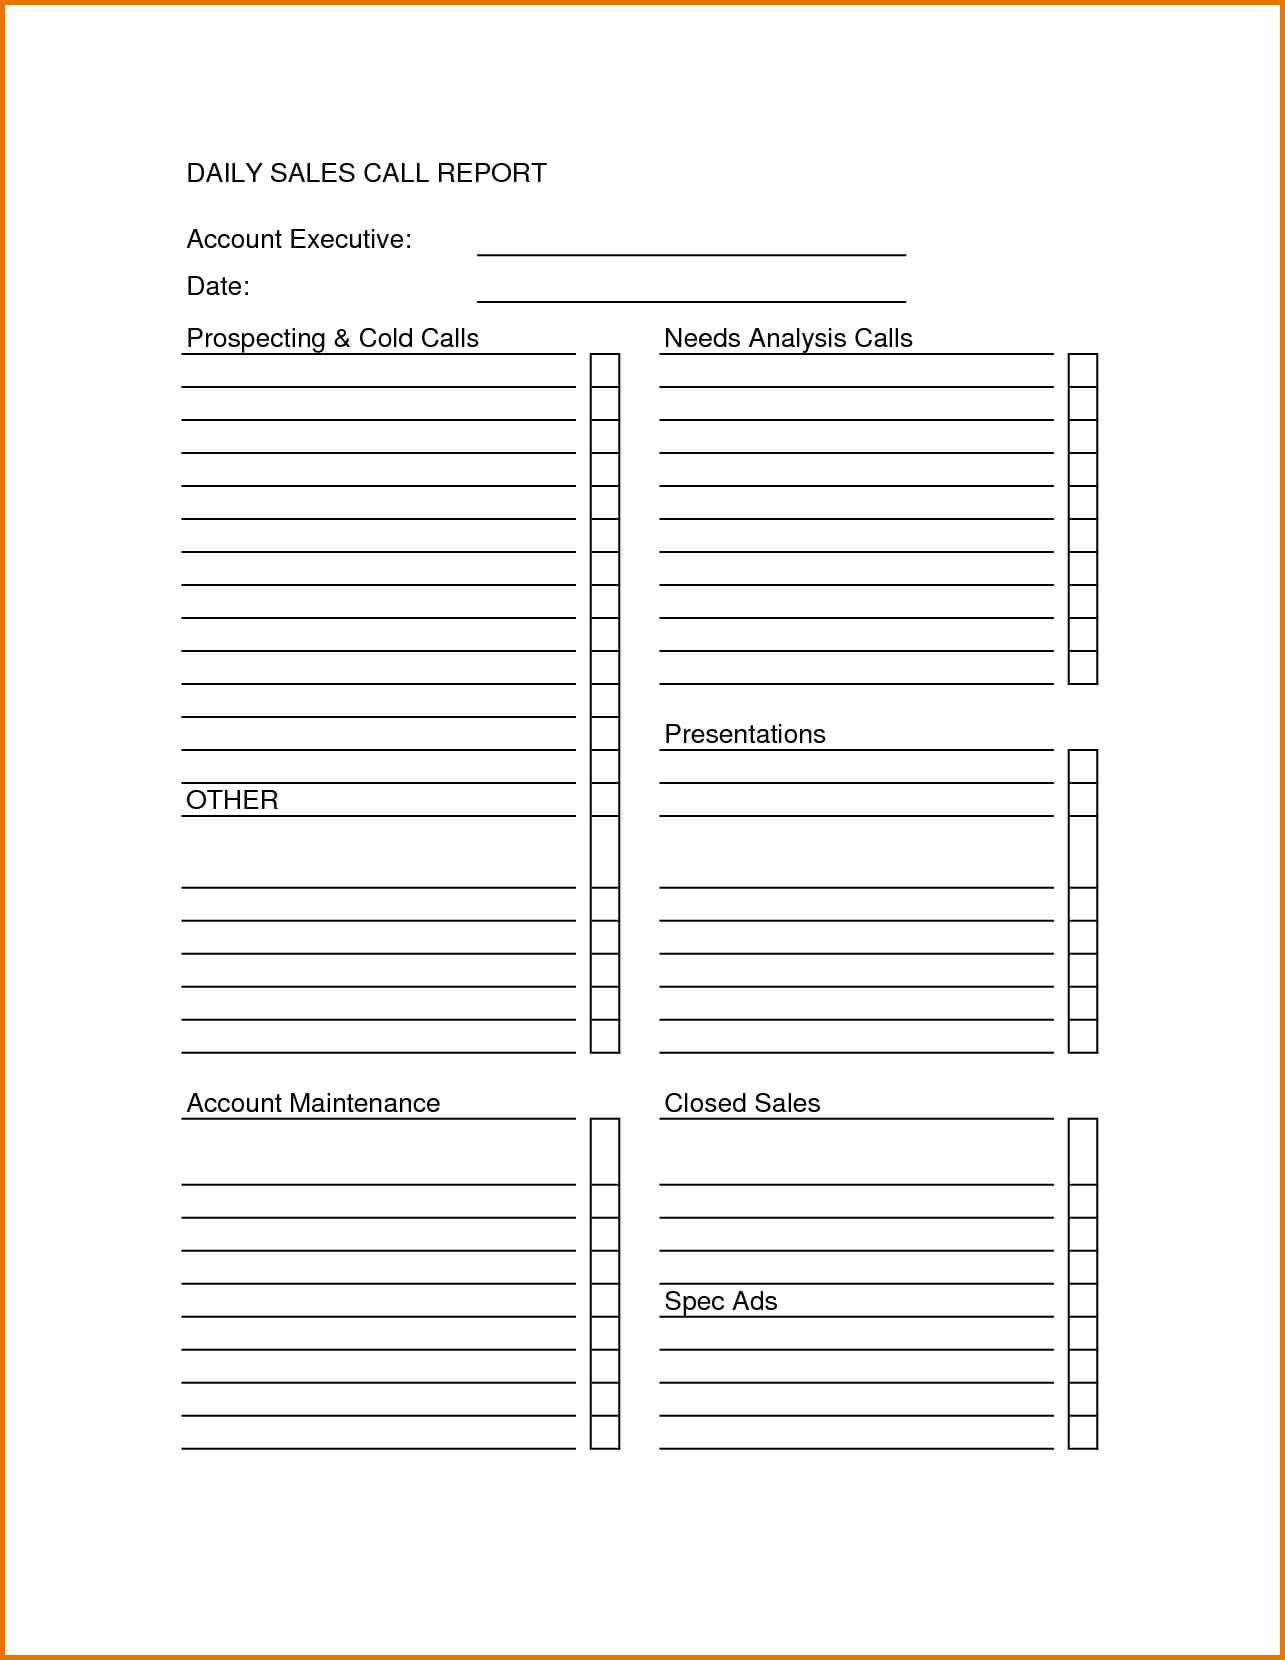 001 Sales Call Report Template Unusual Ideas Daily Excel Pertaining To Sales Call Report Template